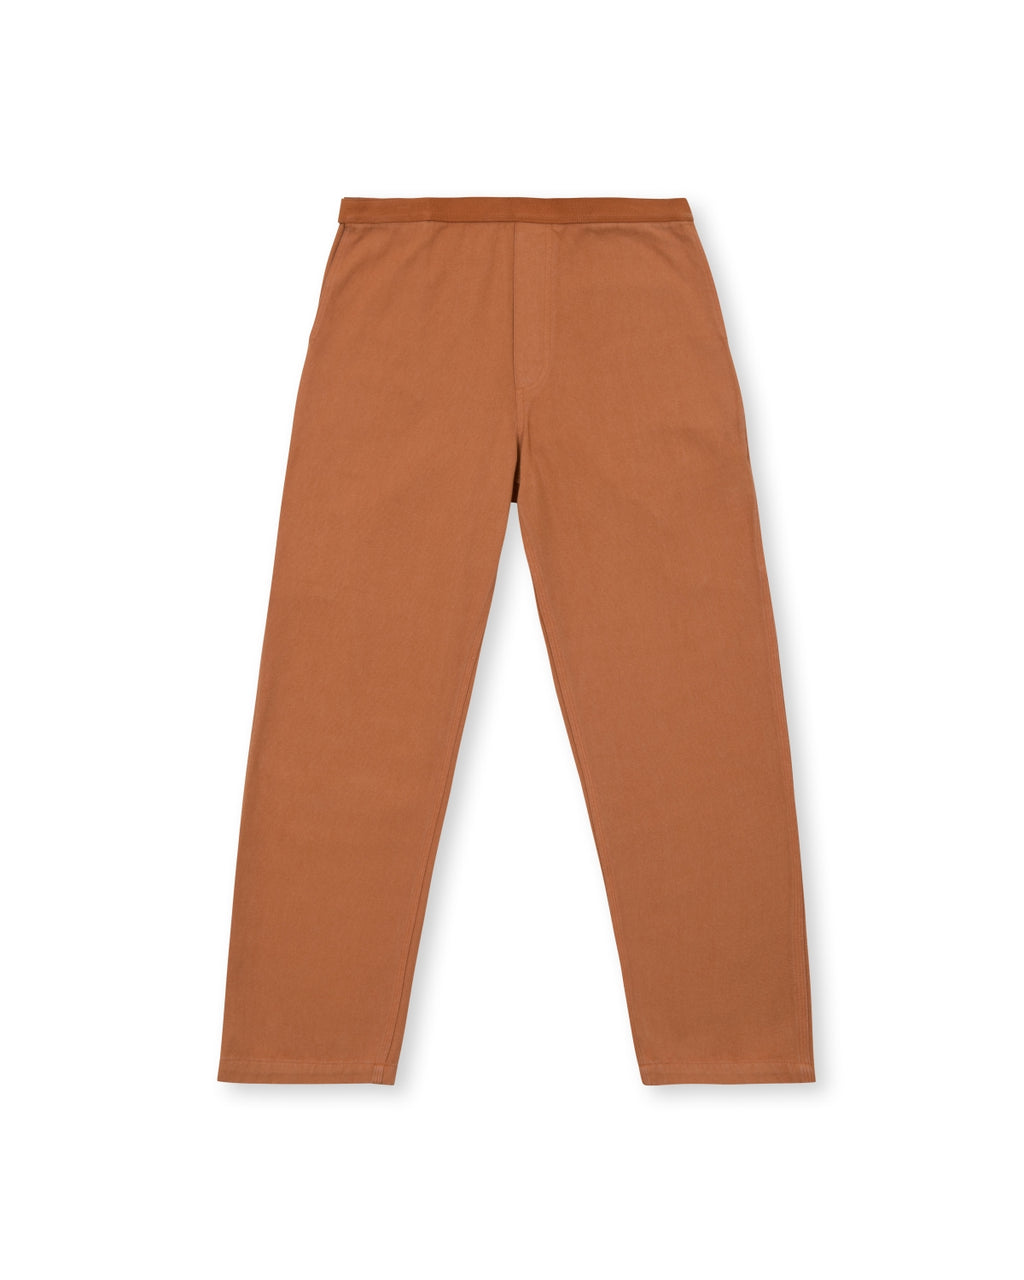 Washed Hard Ware/ Soft Wear Carpenter Pant - Duck Brown